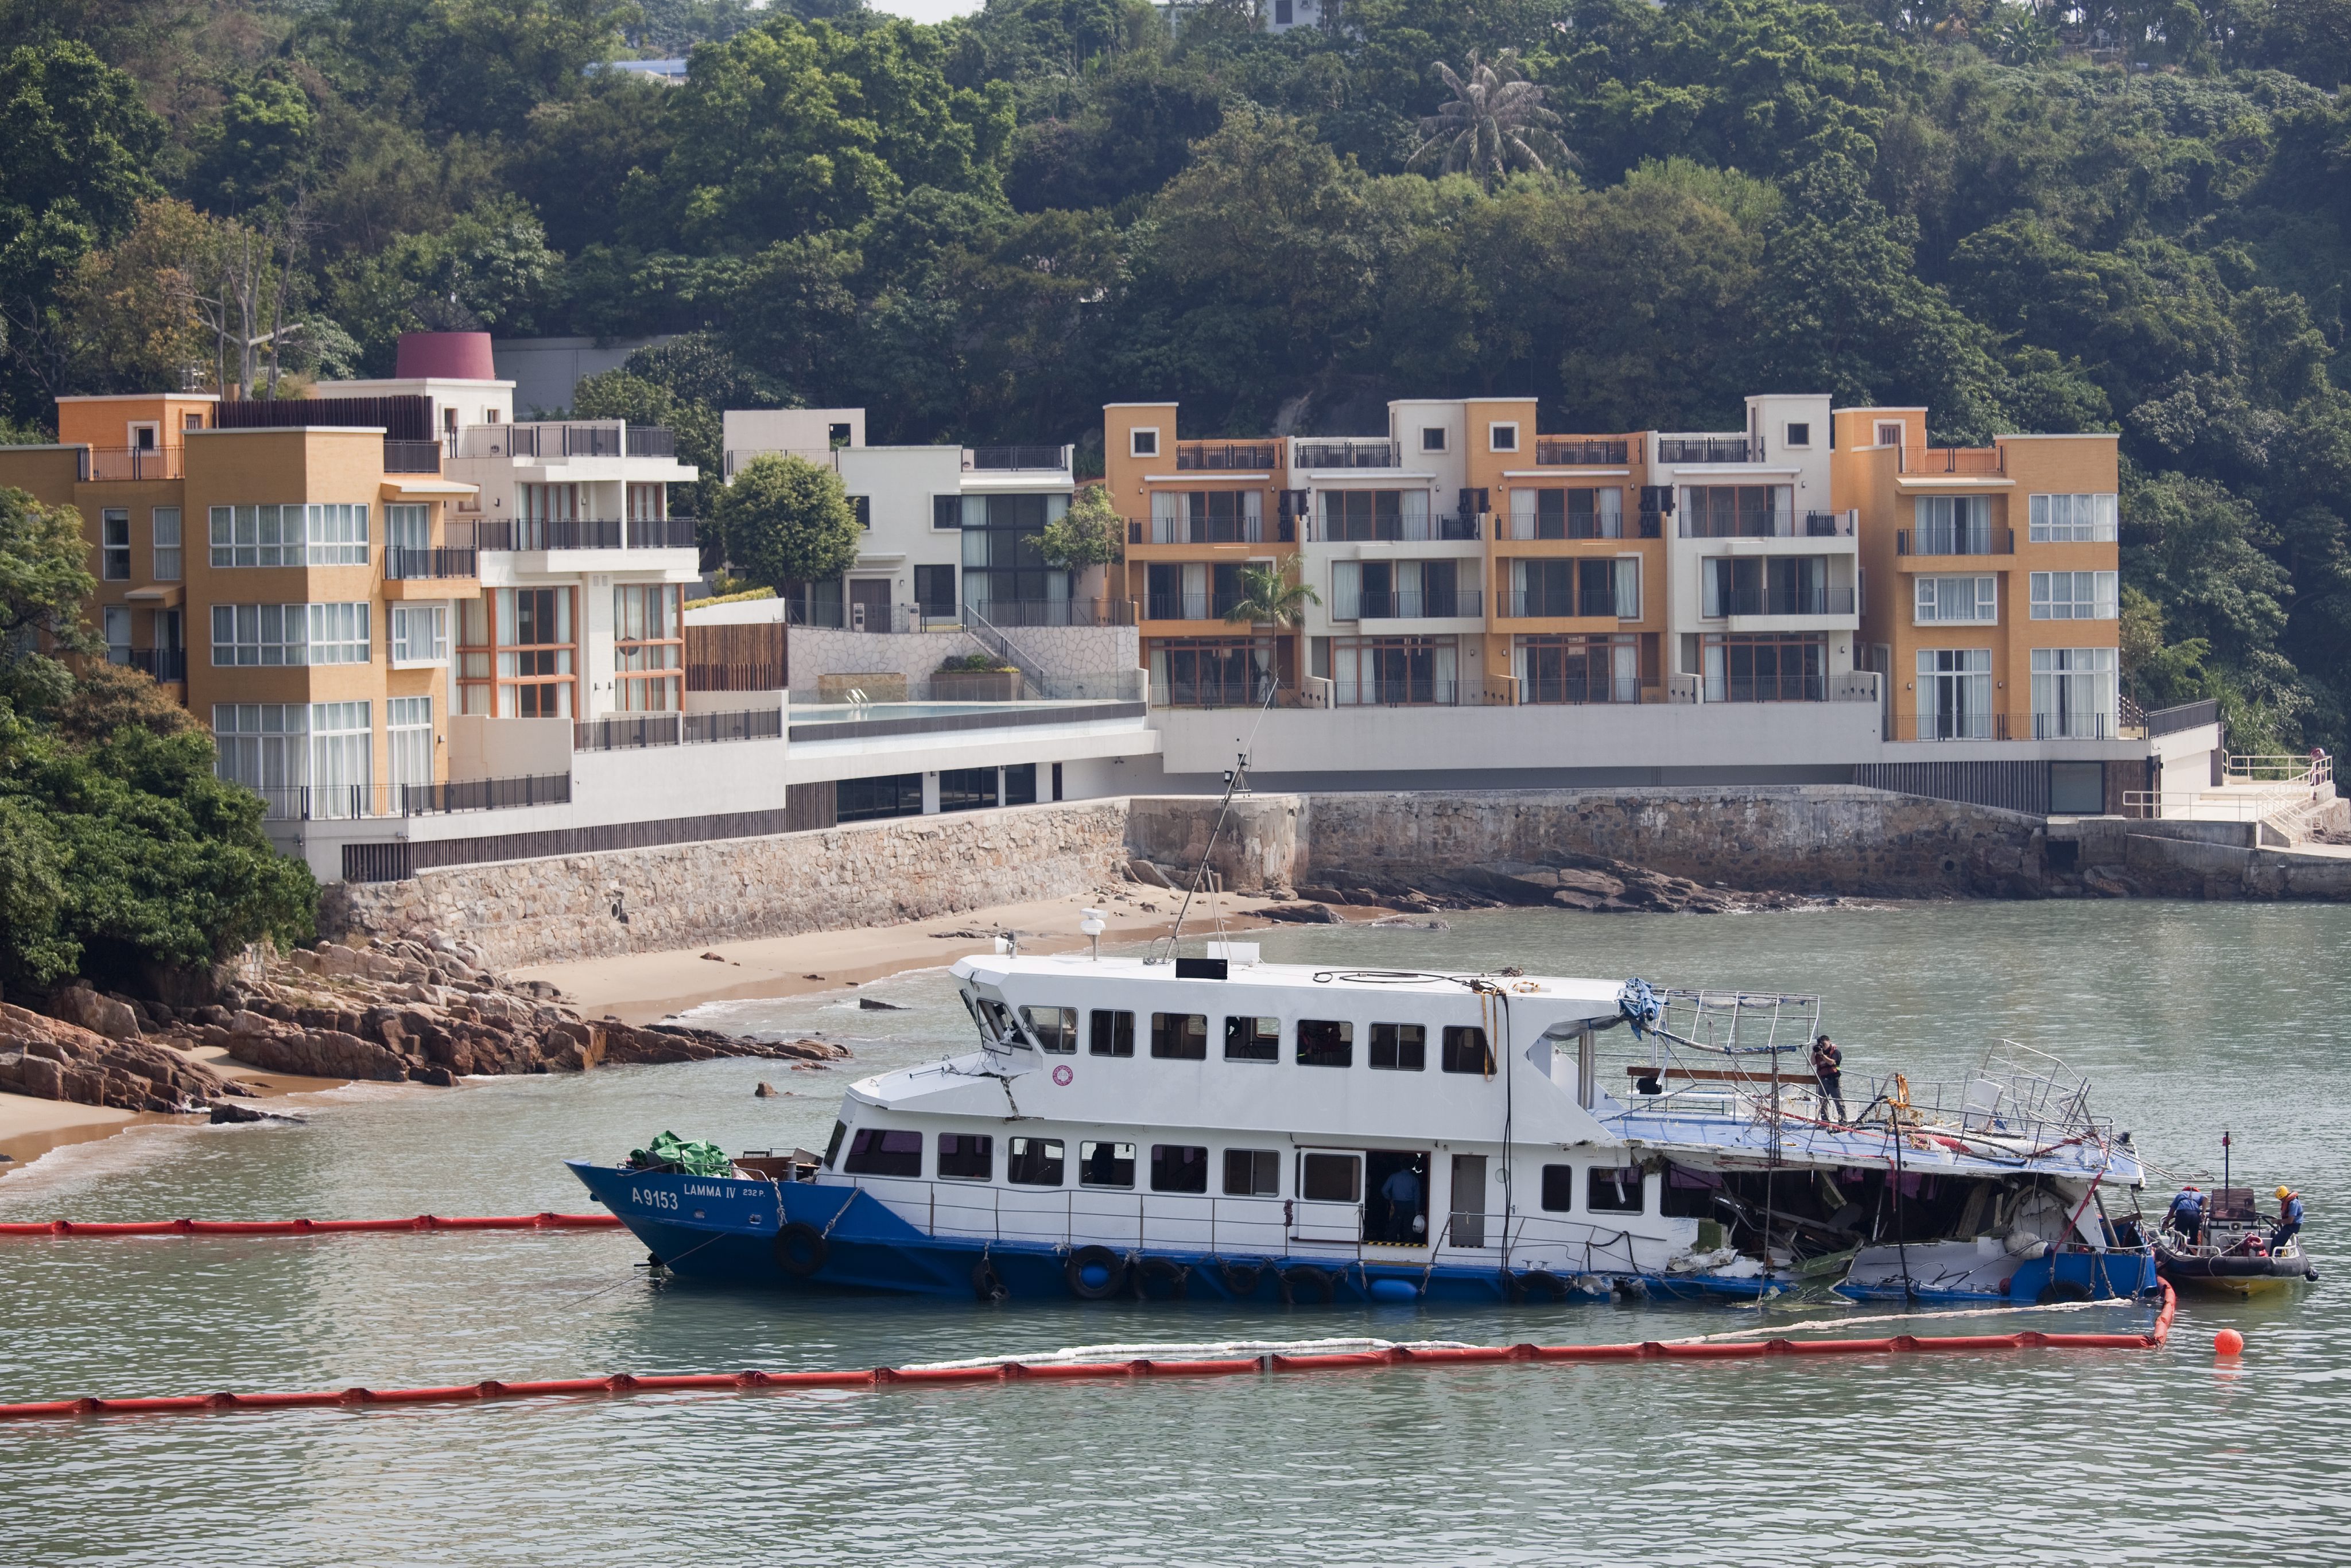 The damaged Lamma IV after the accident. Photo: EPA